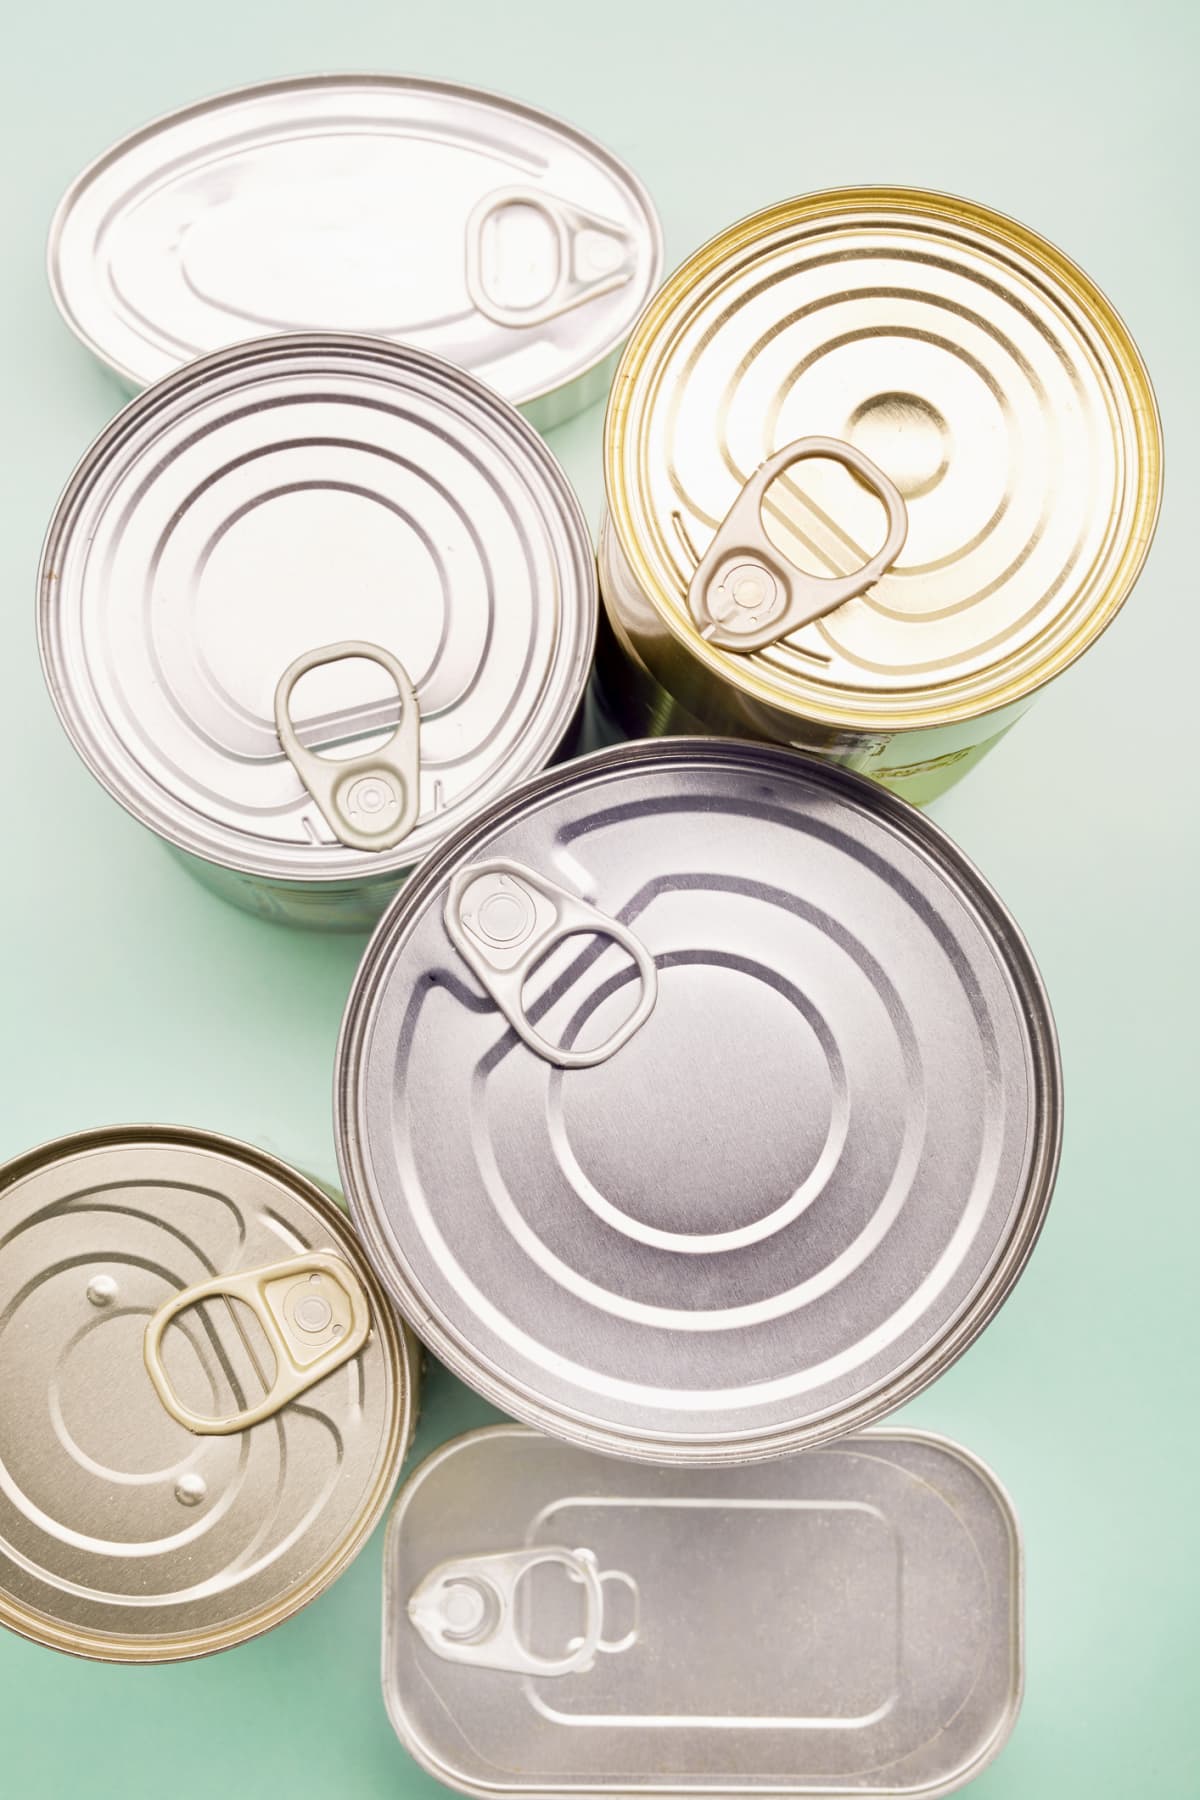 Cans with pull tabs next to each other on teal surface